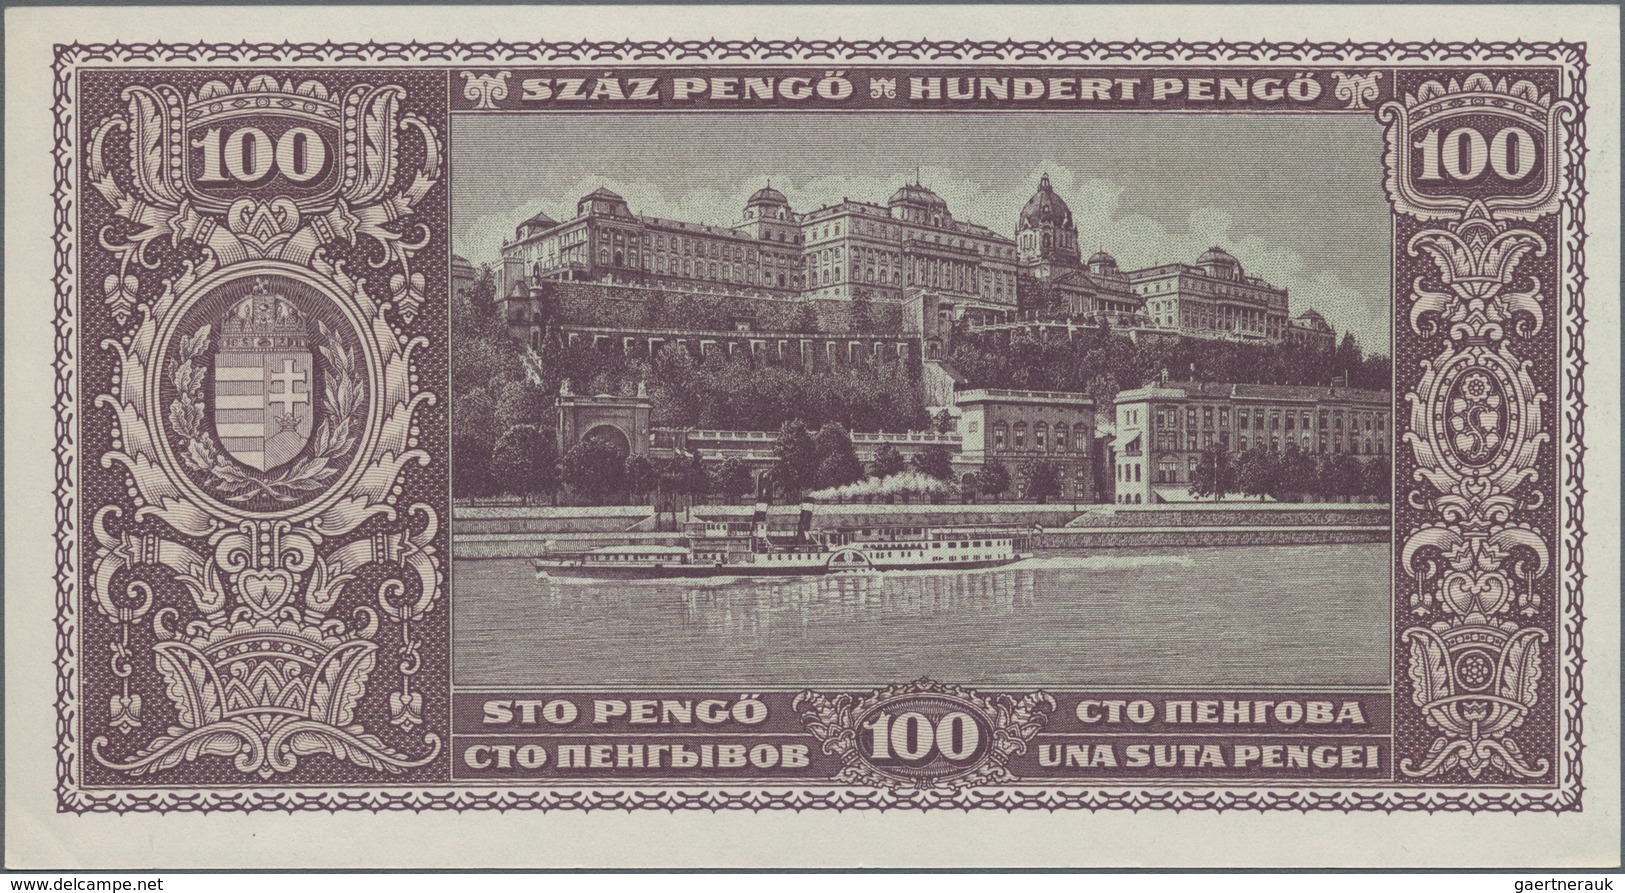 Hungary / Ungarn: Very nice lot with 7 banknotes comprising 50 and 100 Pengö 1945 P.110, 111 (UNC, a